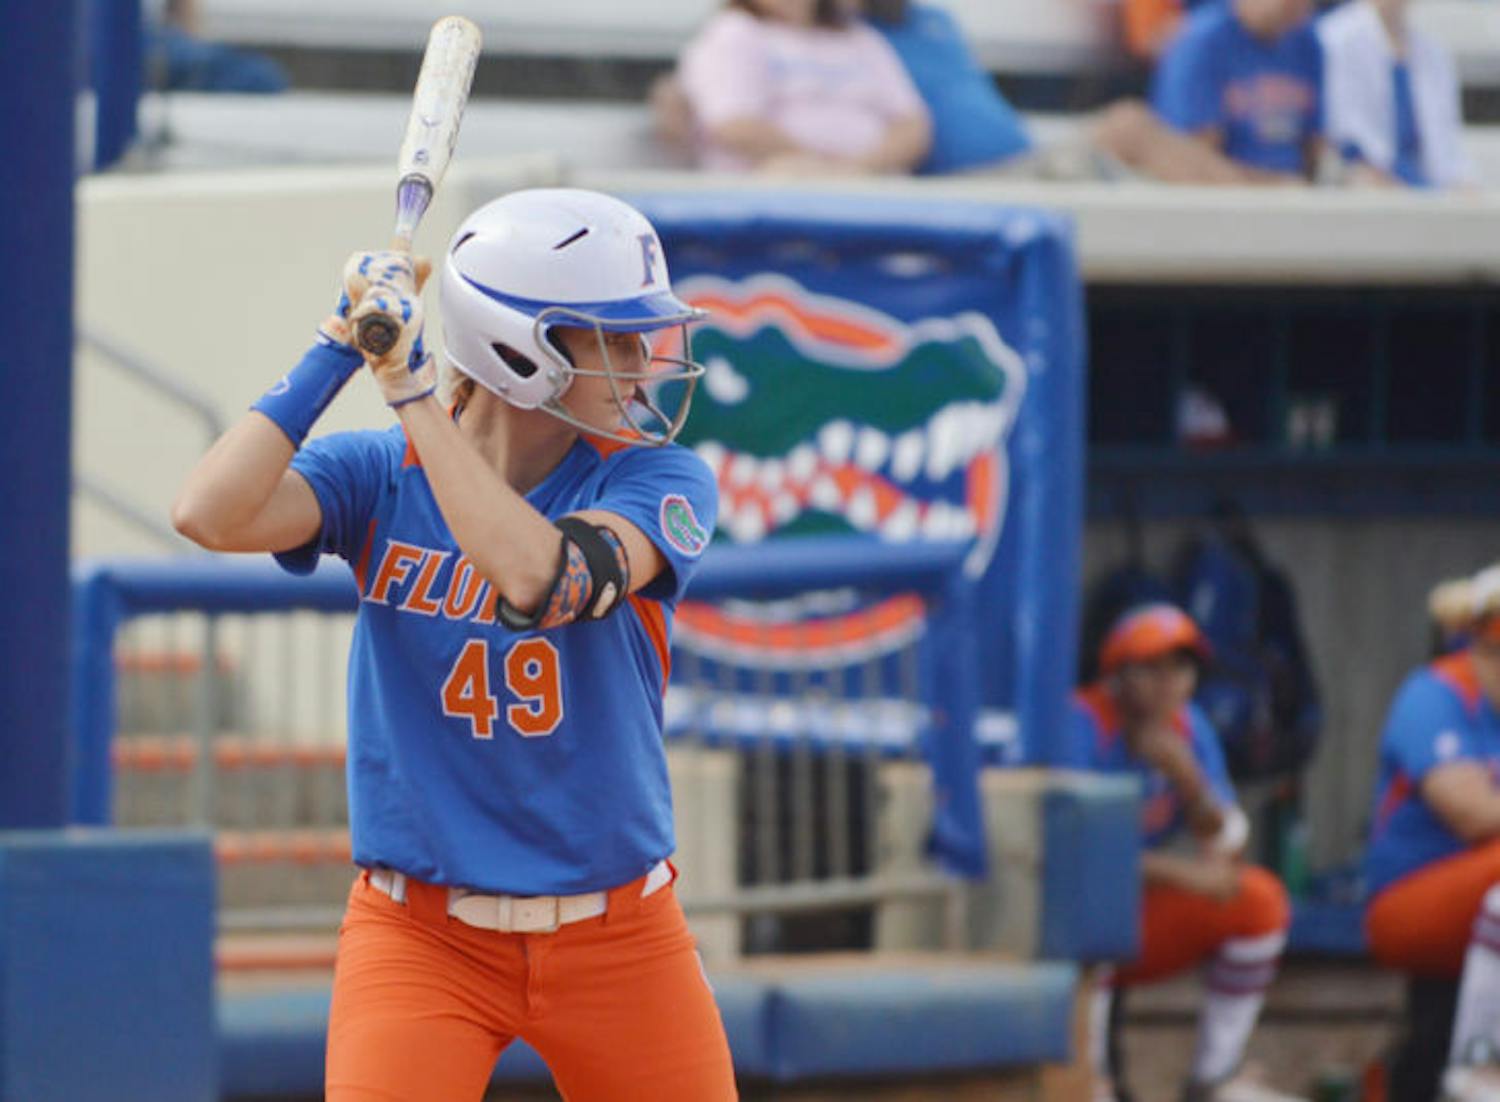 Taylor Schwarz bats during Florida’s 8-0 win against Indiana on Feb. 22 at Katie Seashole Pressly Stadium. Schwarz hit a solo home run in UF’s 10-6 win against UCF on Wednesday.